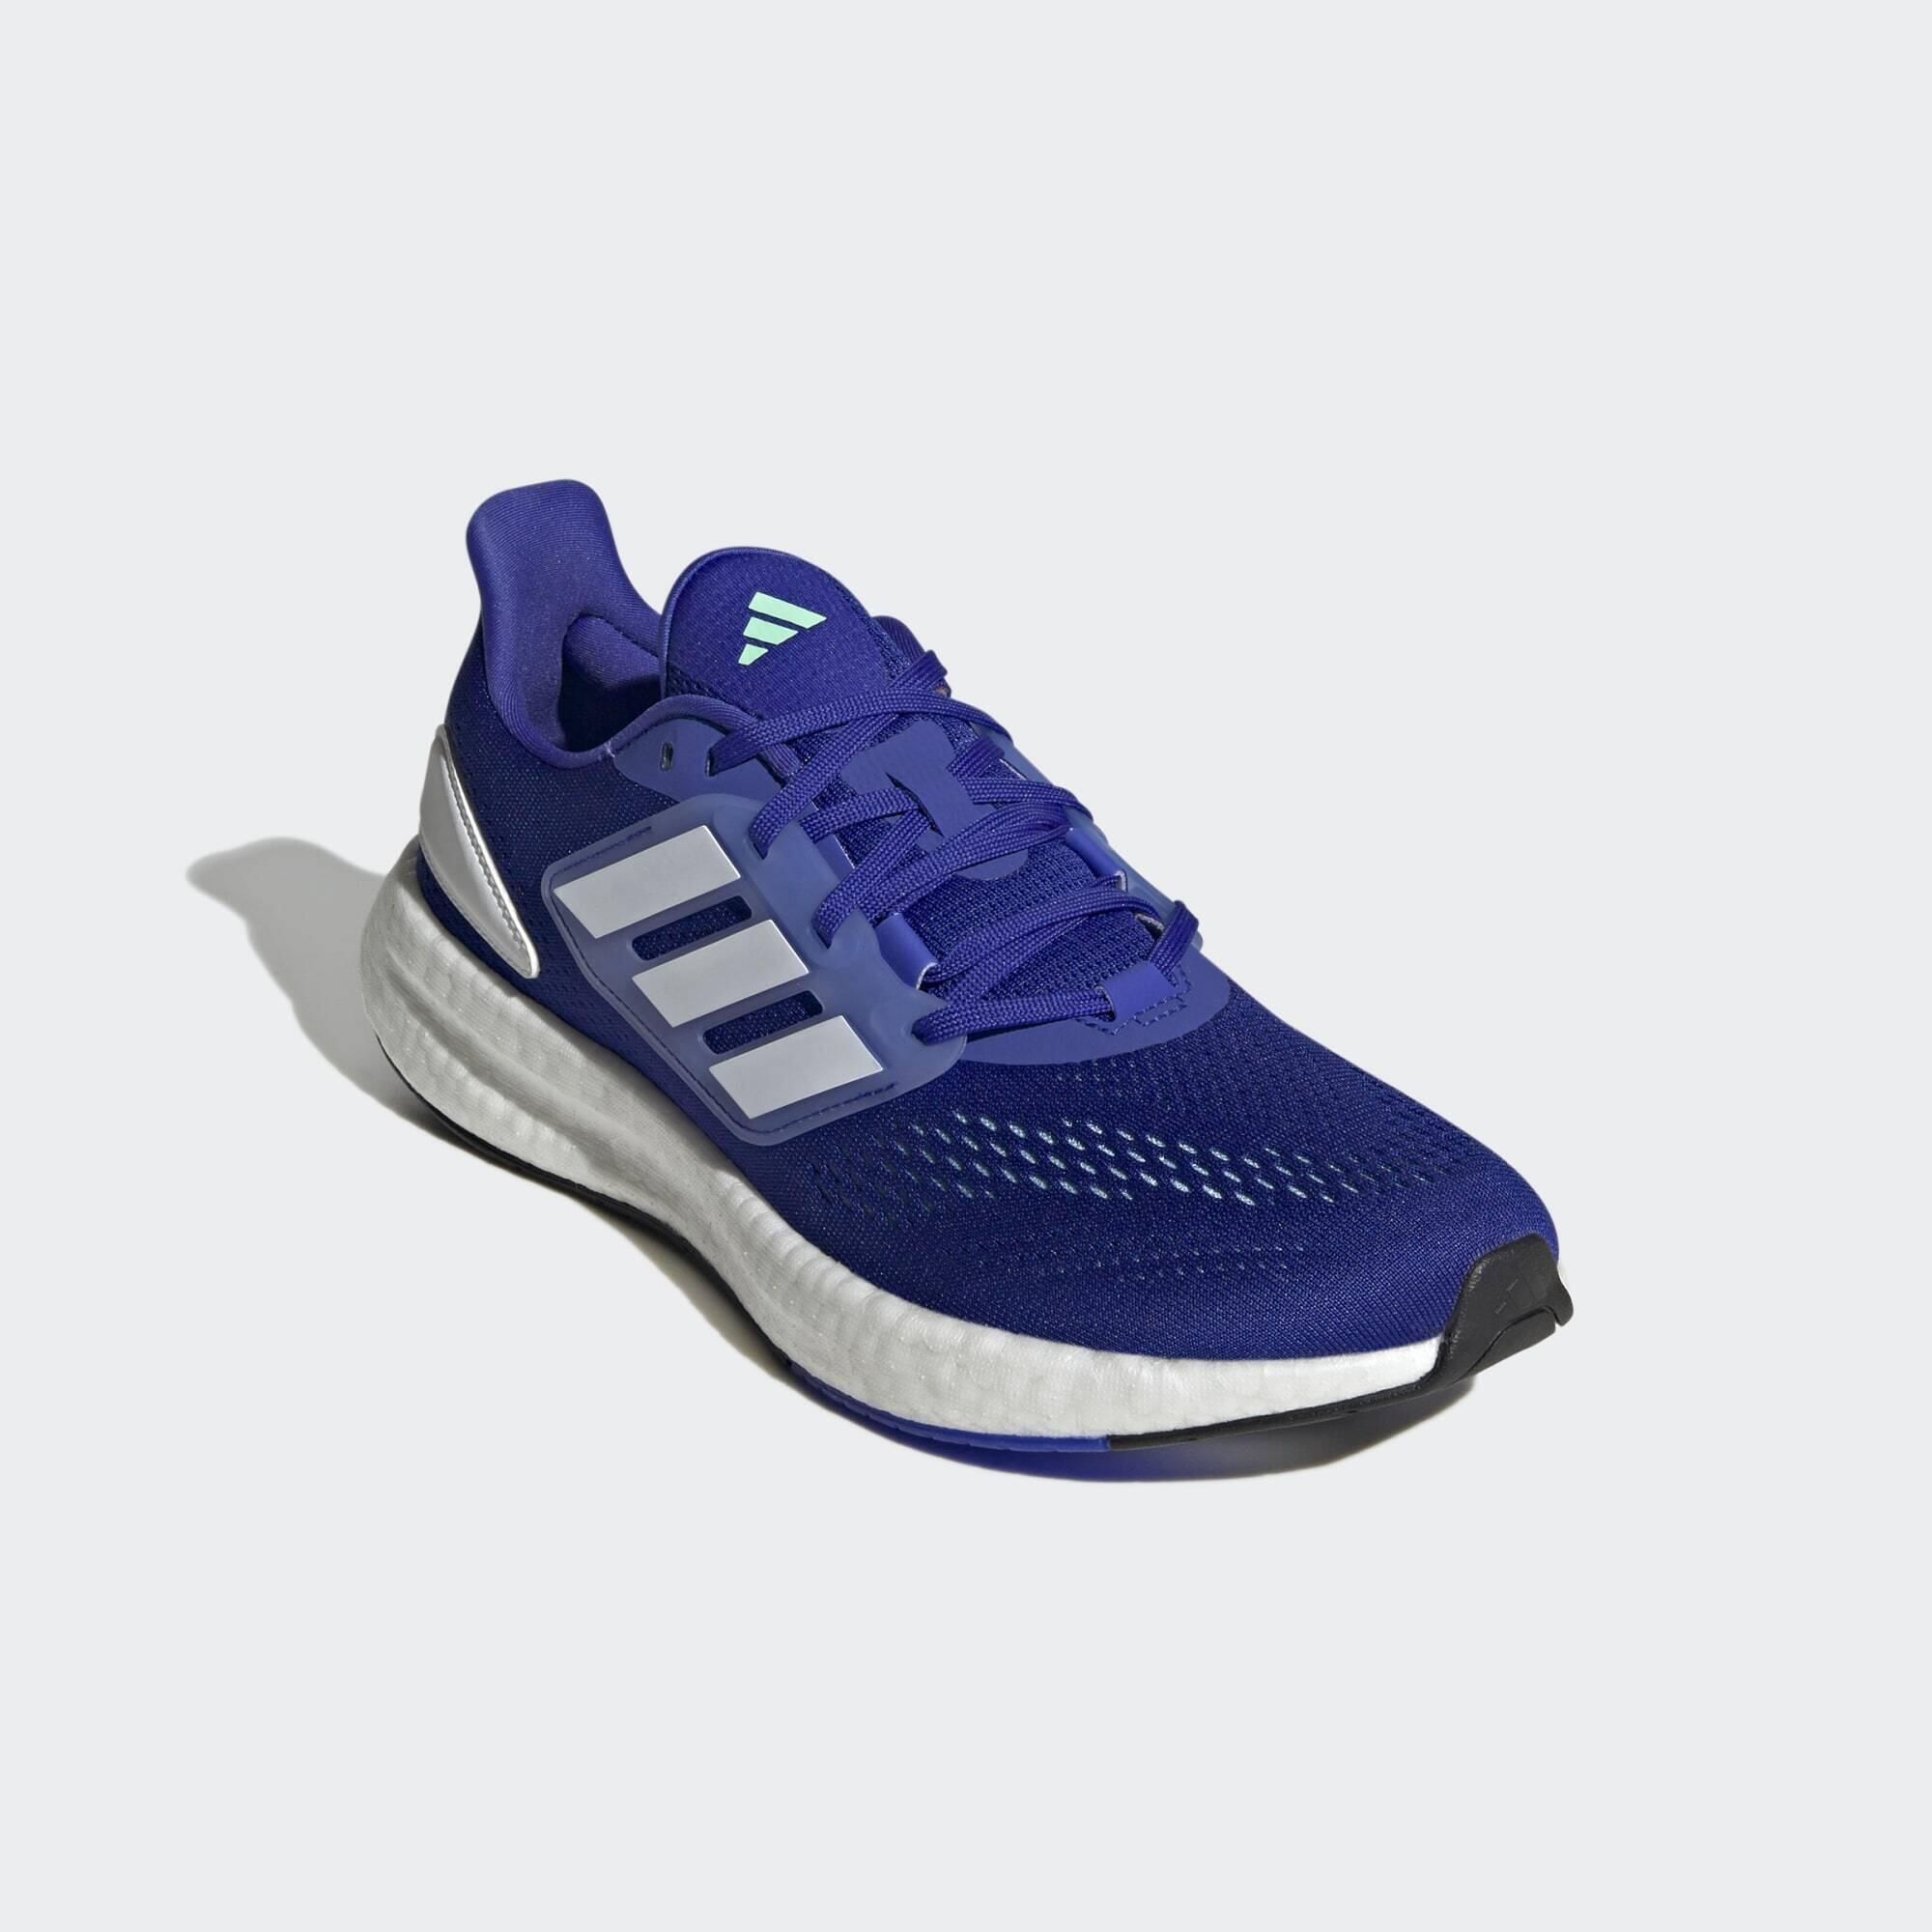 Pureboost 22 Shoes 5/7